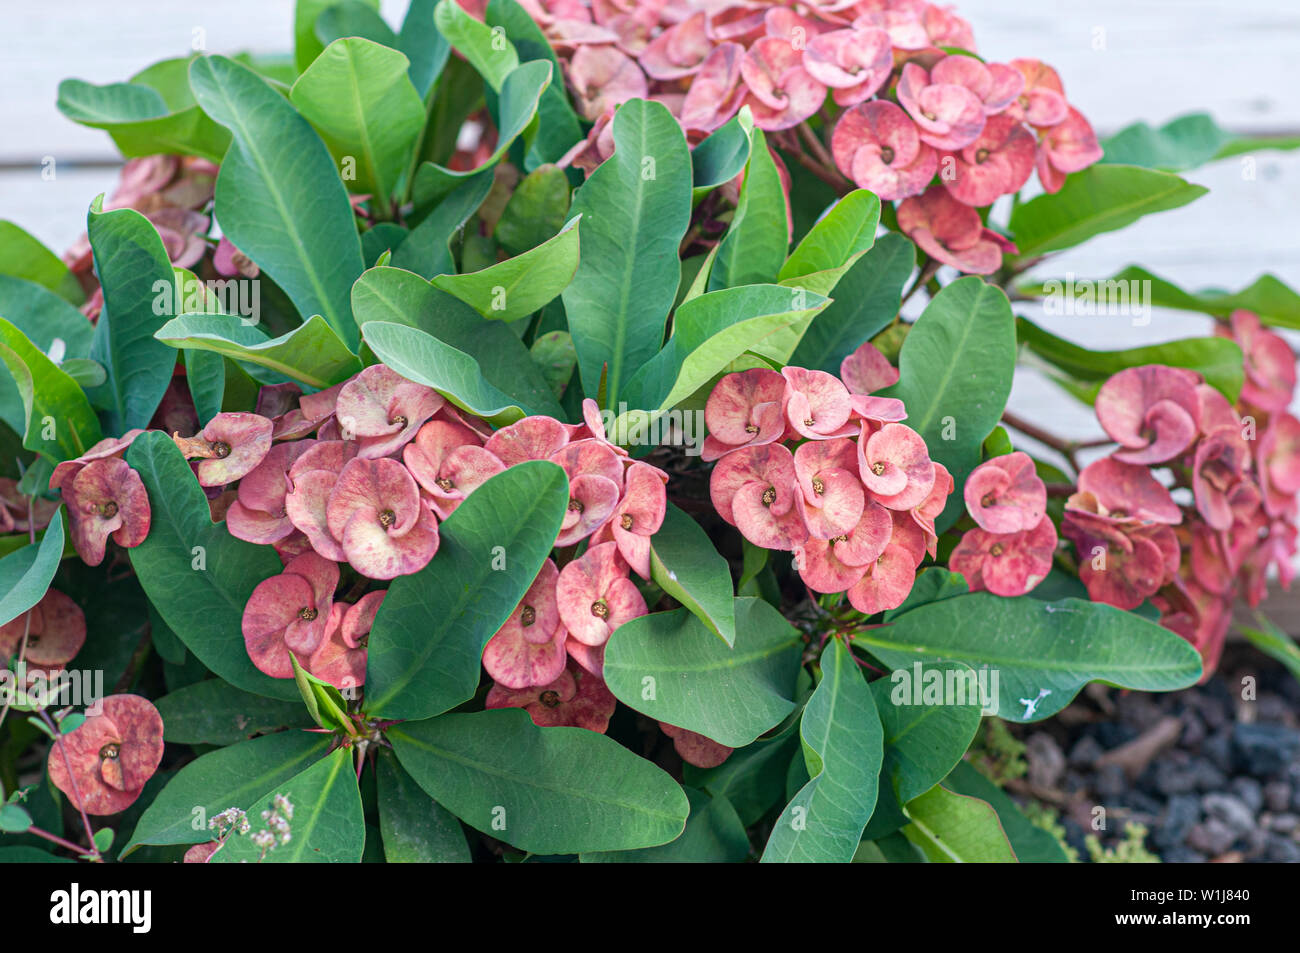 Flowering Euphorbia milii, common names include the crown of thorns, Christ plant, or Christ thorn, called Corona de Cristo in Latin America. Photogra Stock Photo